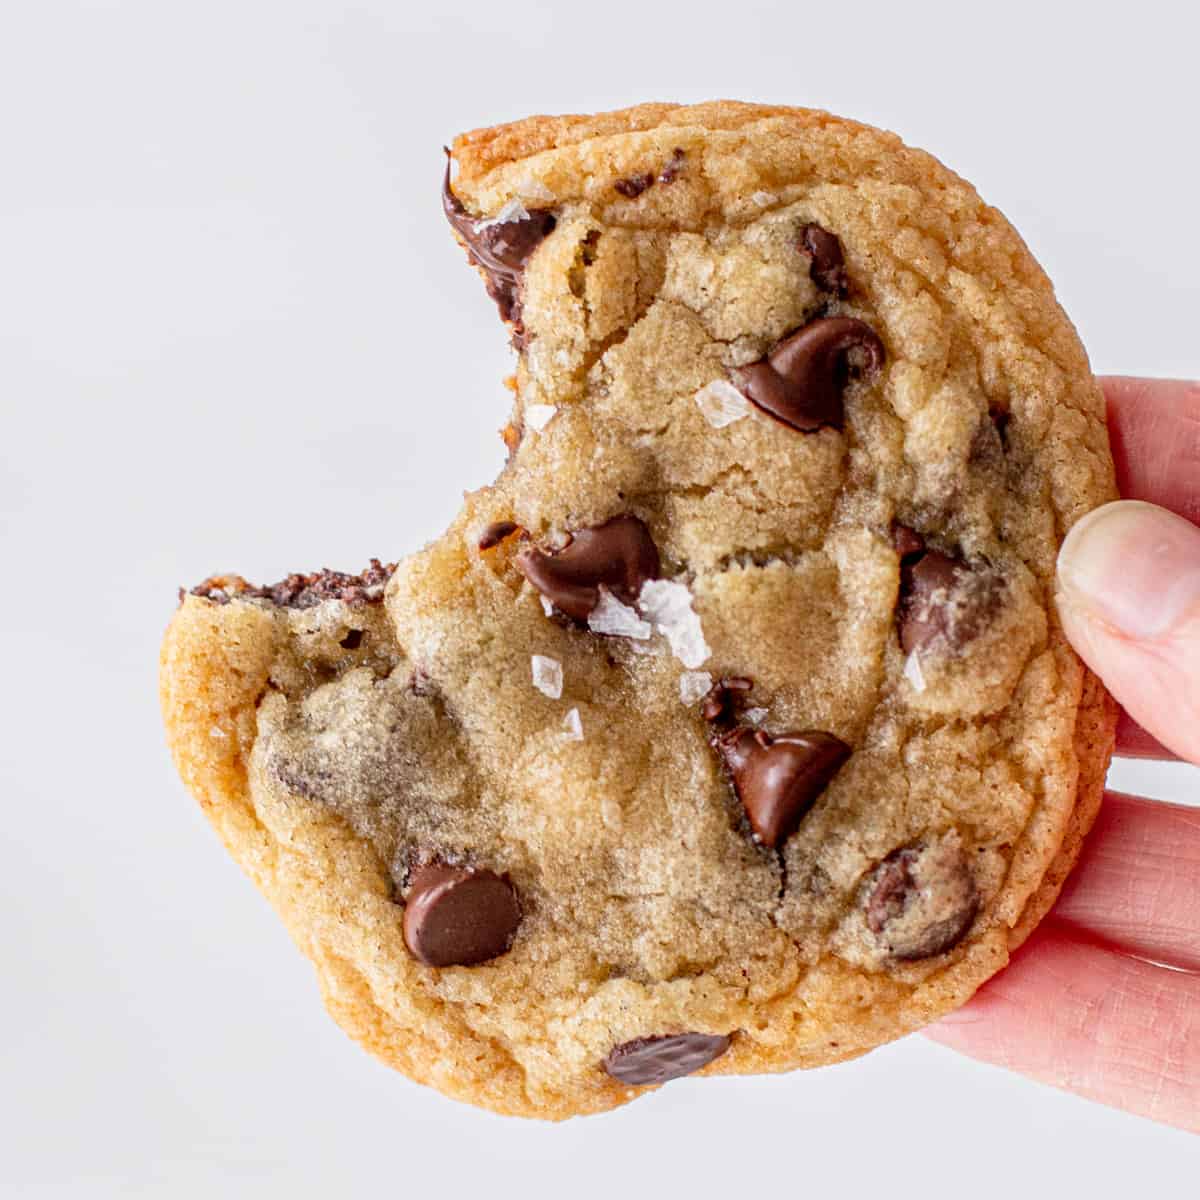 Fool proof Chocolate Chip Cookie Recipe - Gold Medal Flour